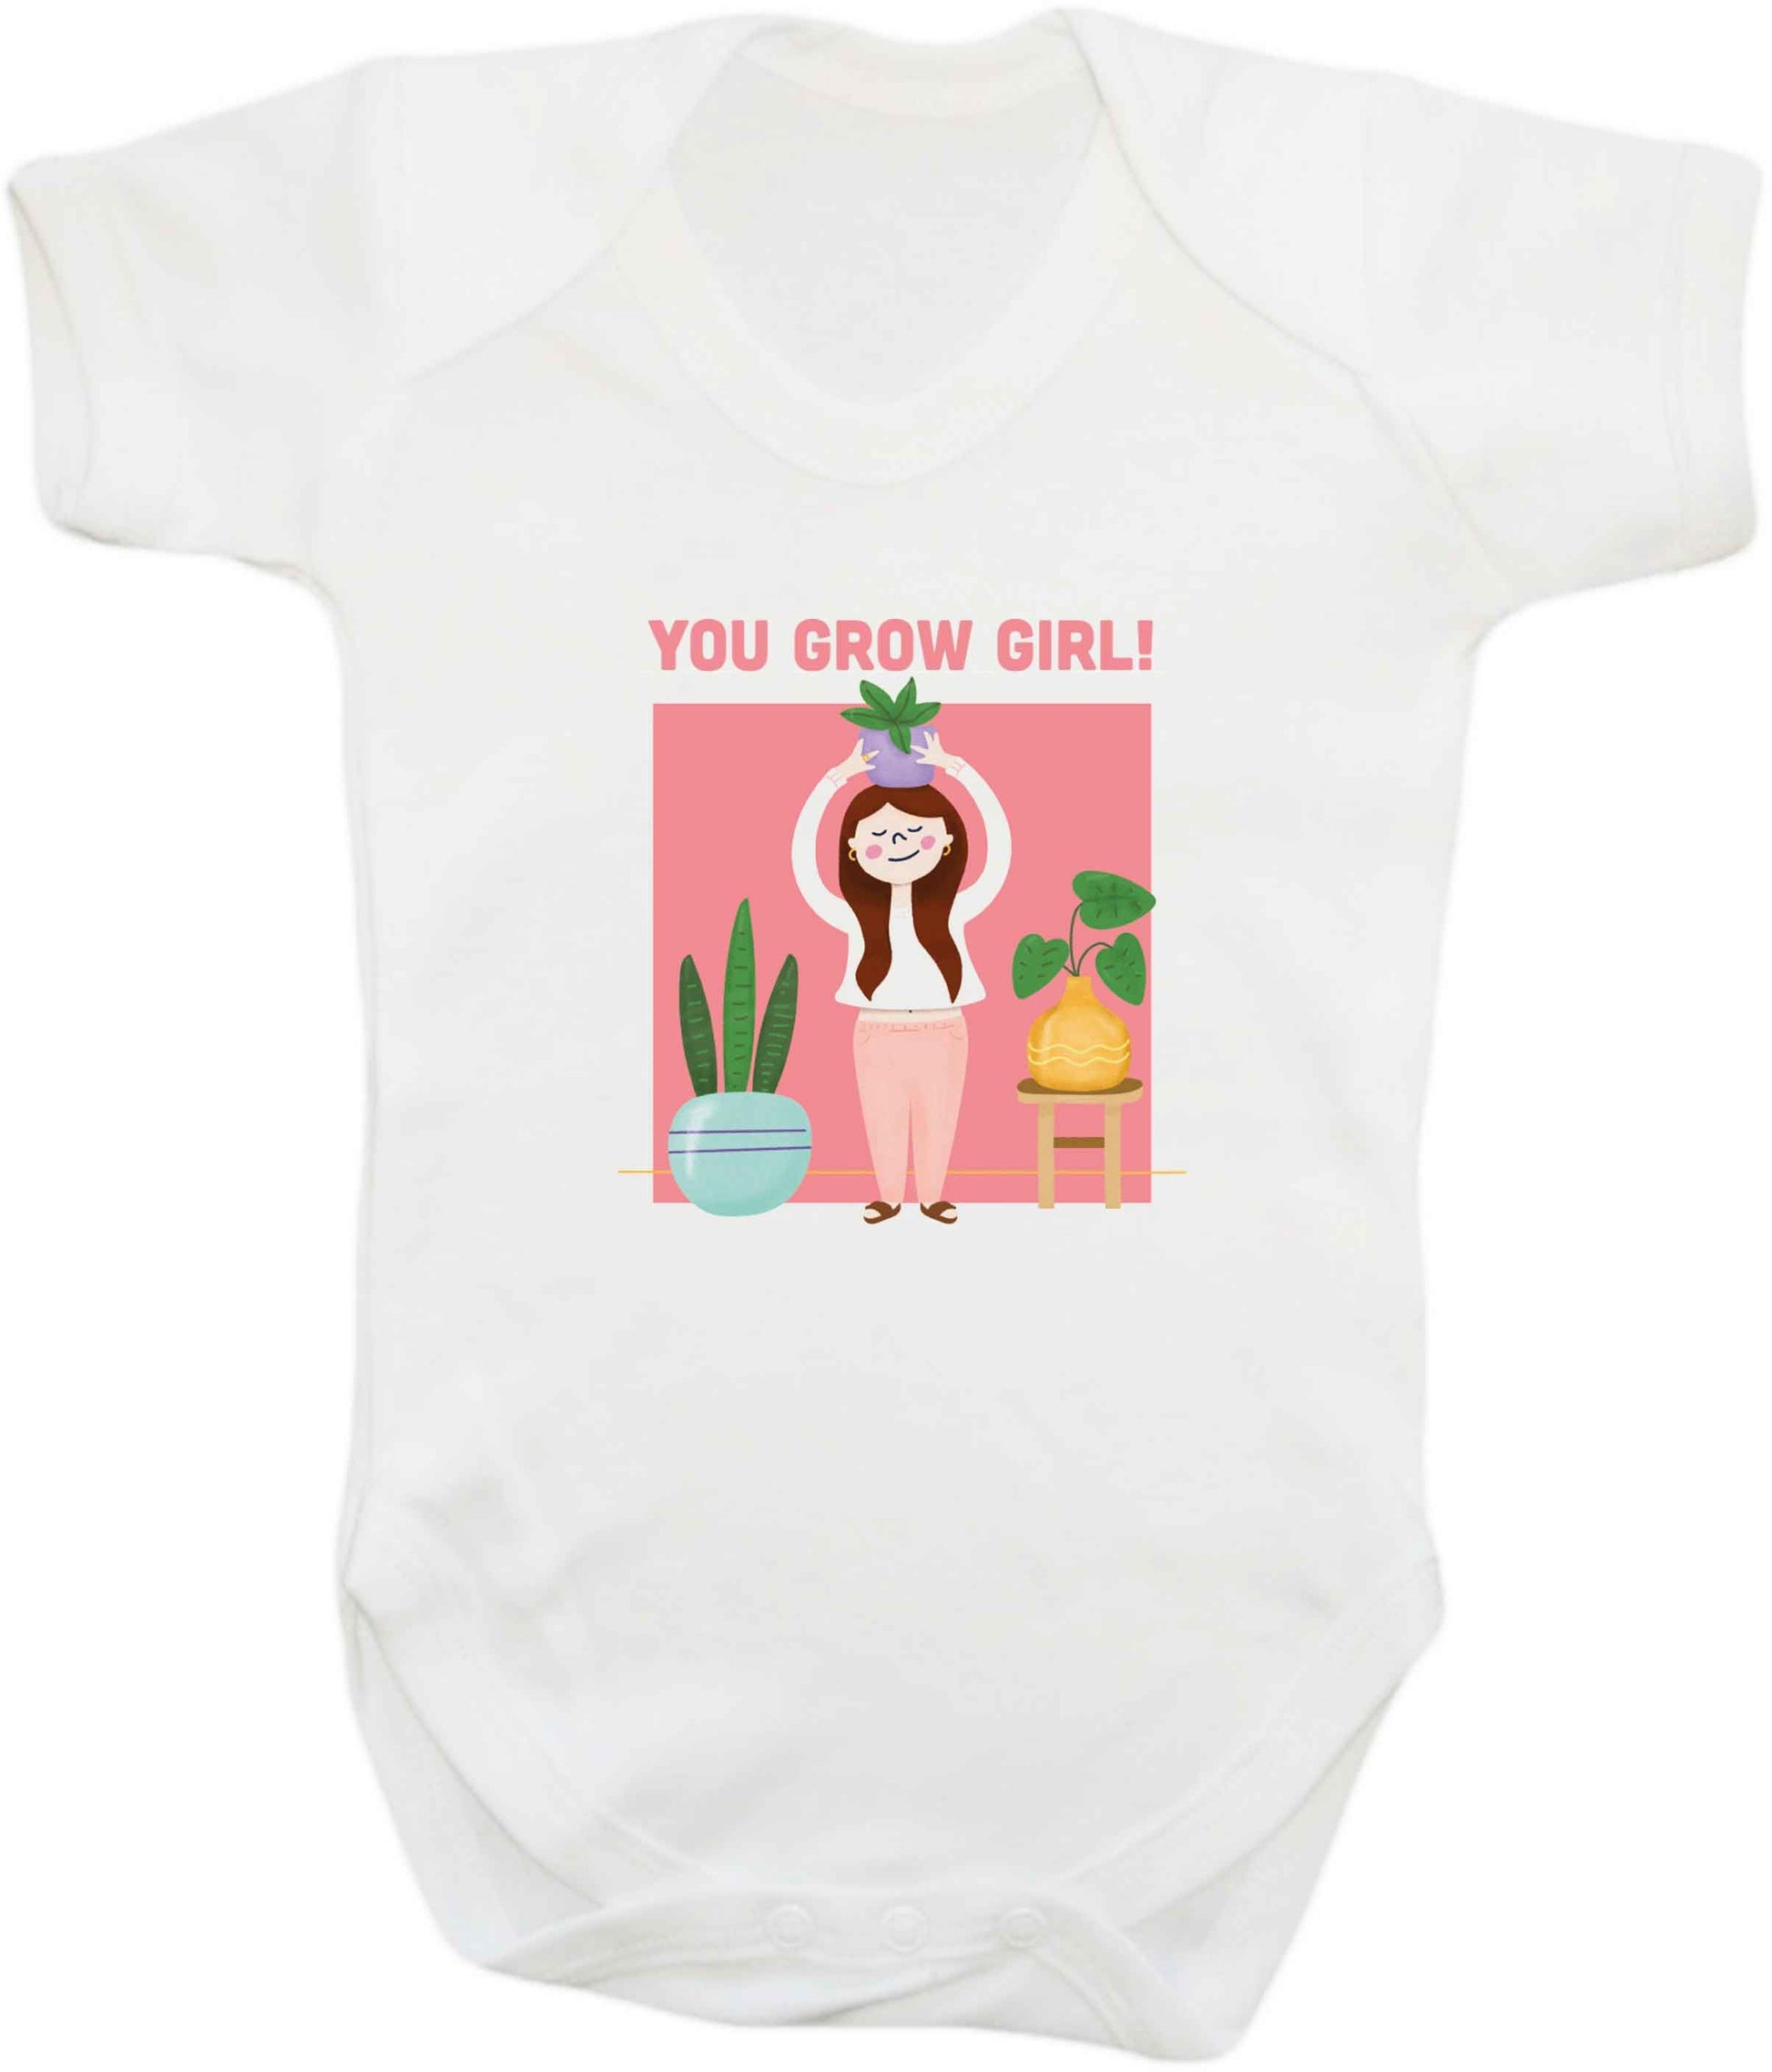 You grow girl baby vest white 18-24 months